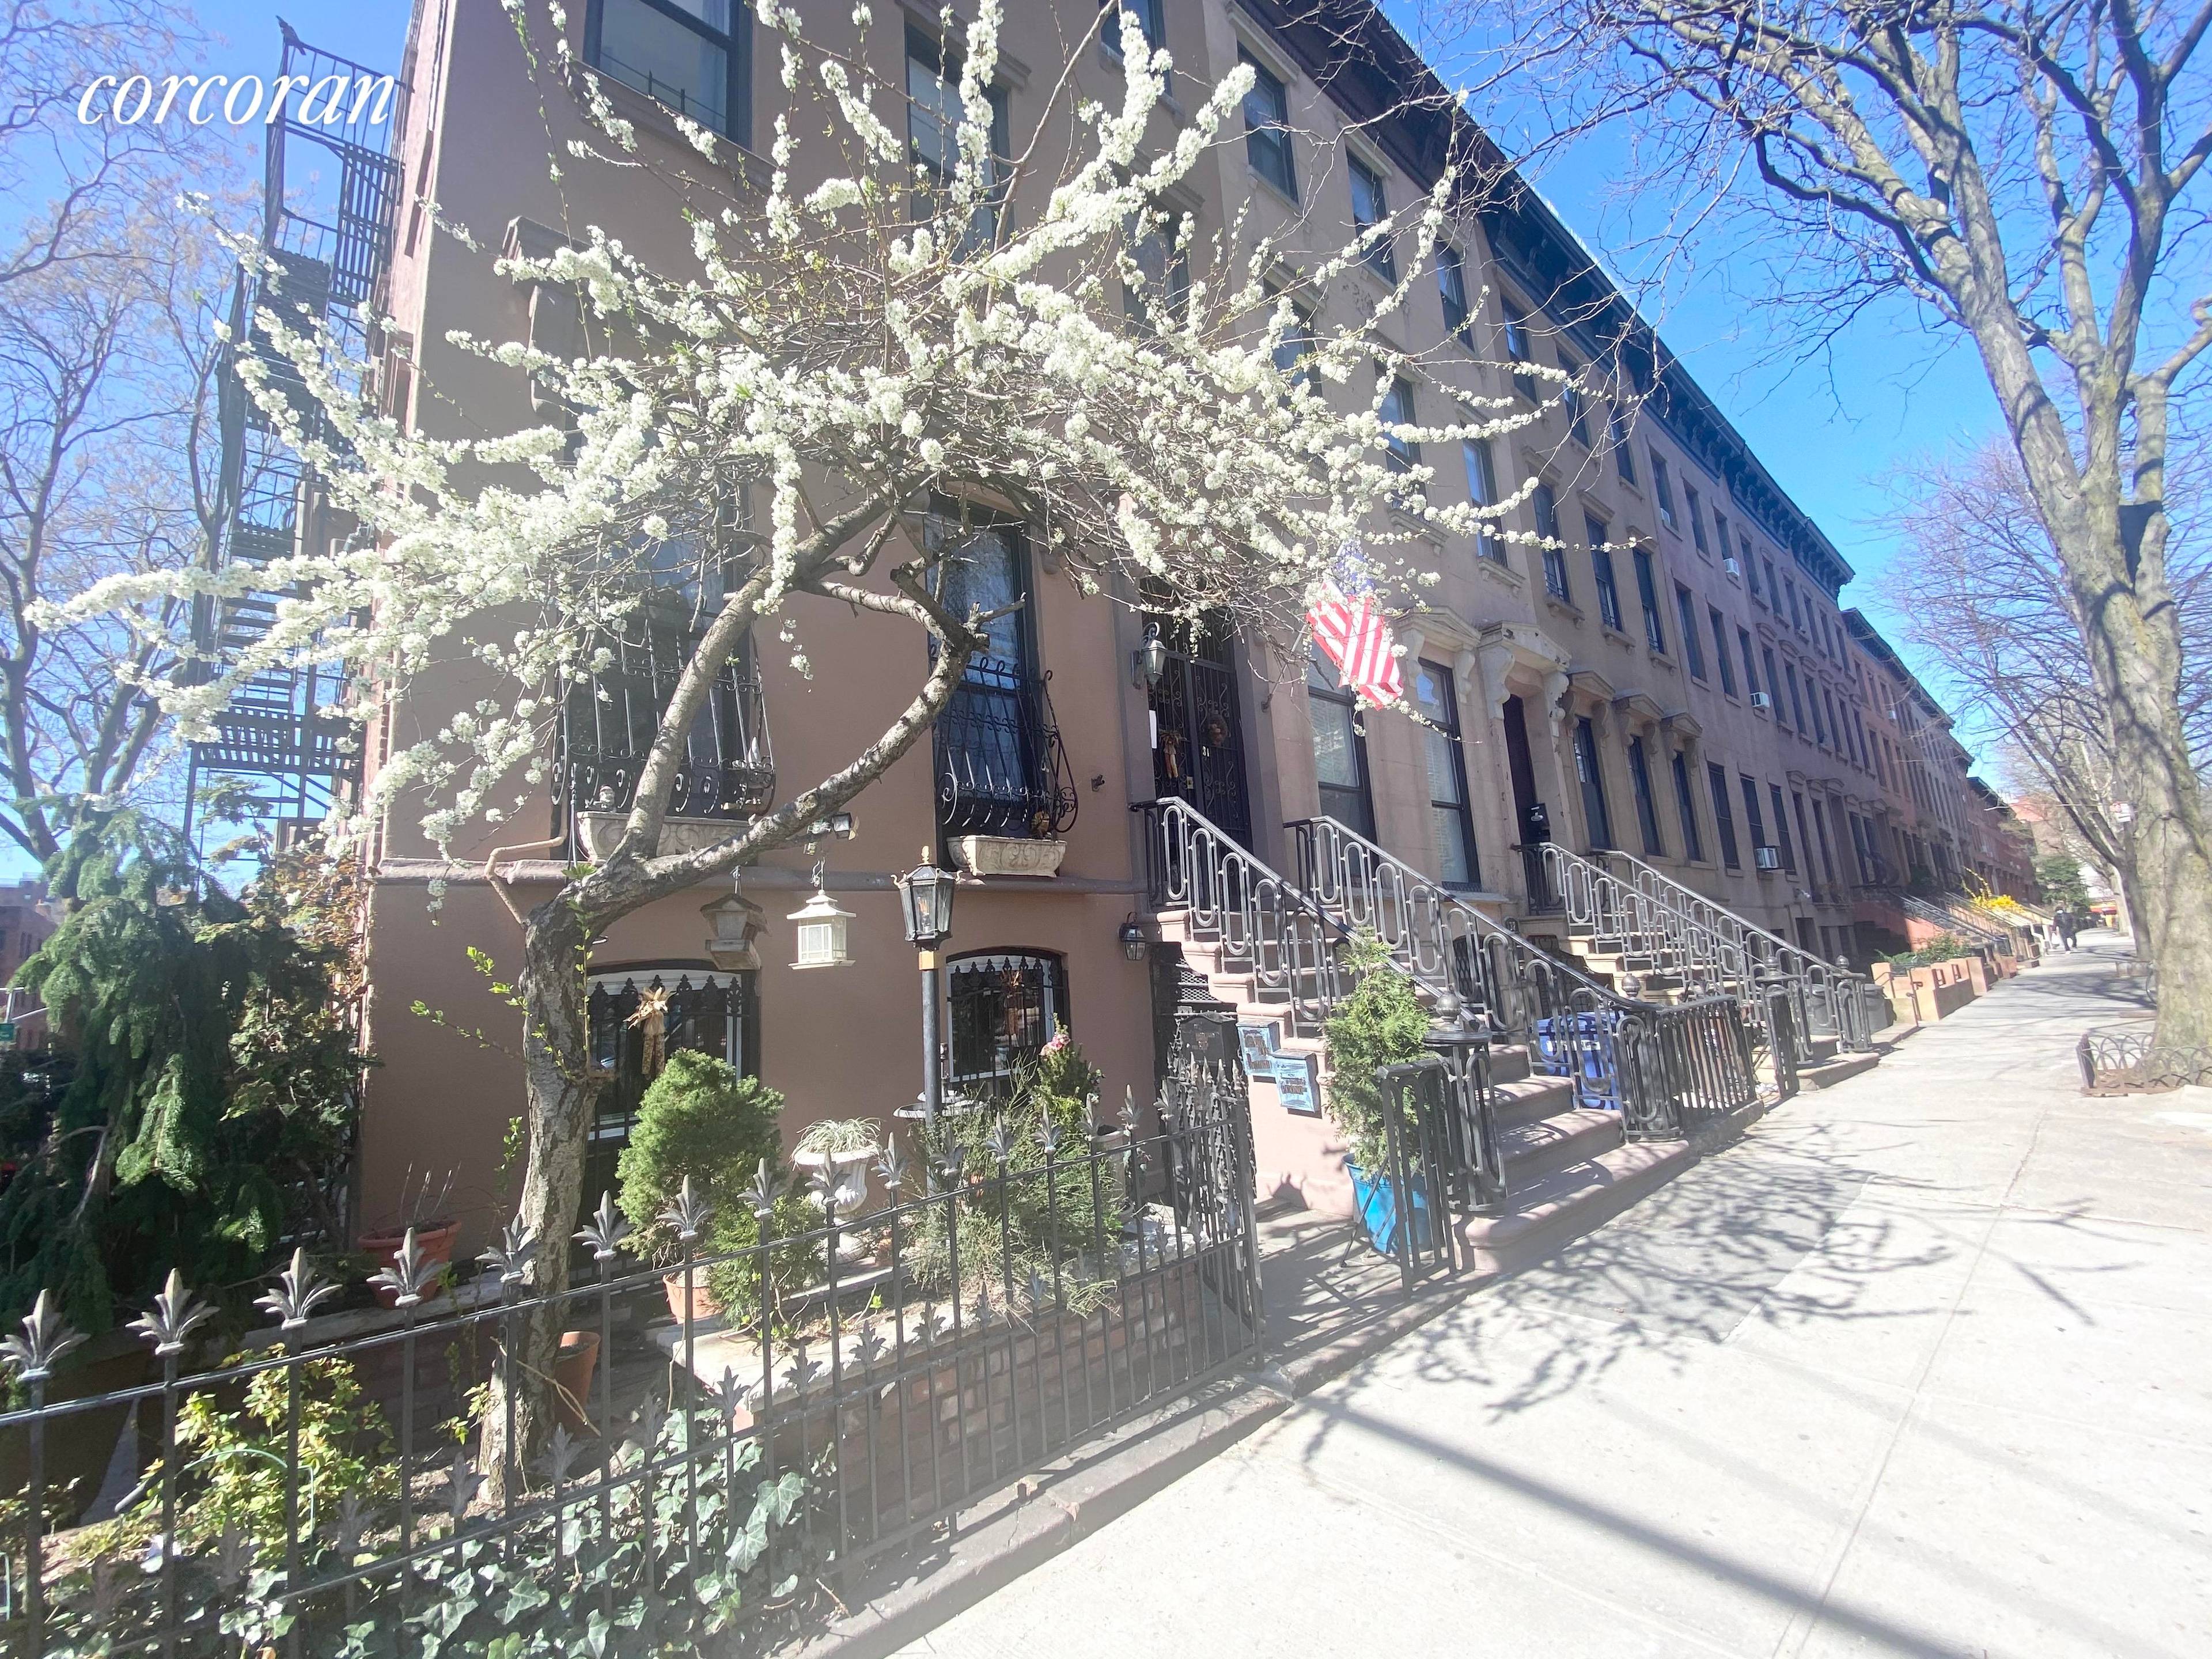 134 Dean Street Brooklyn, New York 11201 Apt 3 June 1st or June 15th Move In The opportunity is knocking to make this gorgeous two bedroom townhouse apartment your new ...